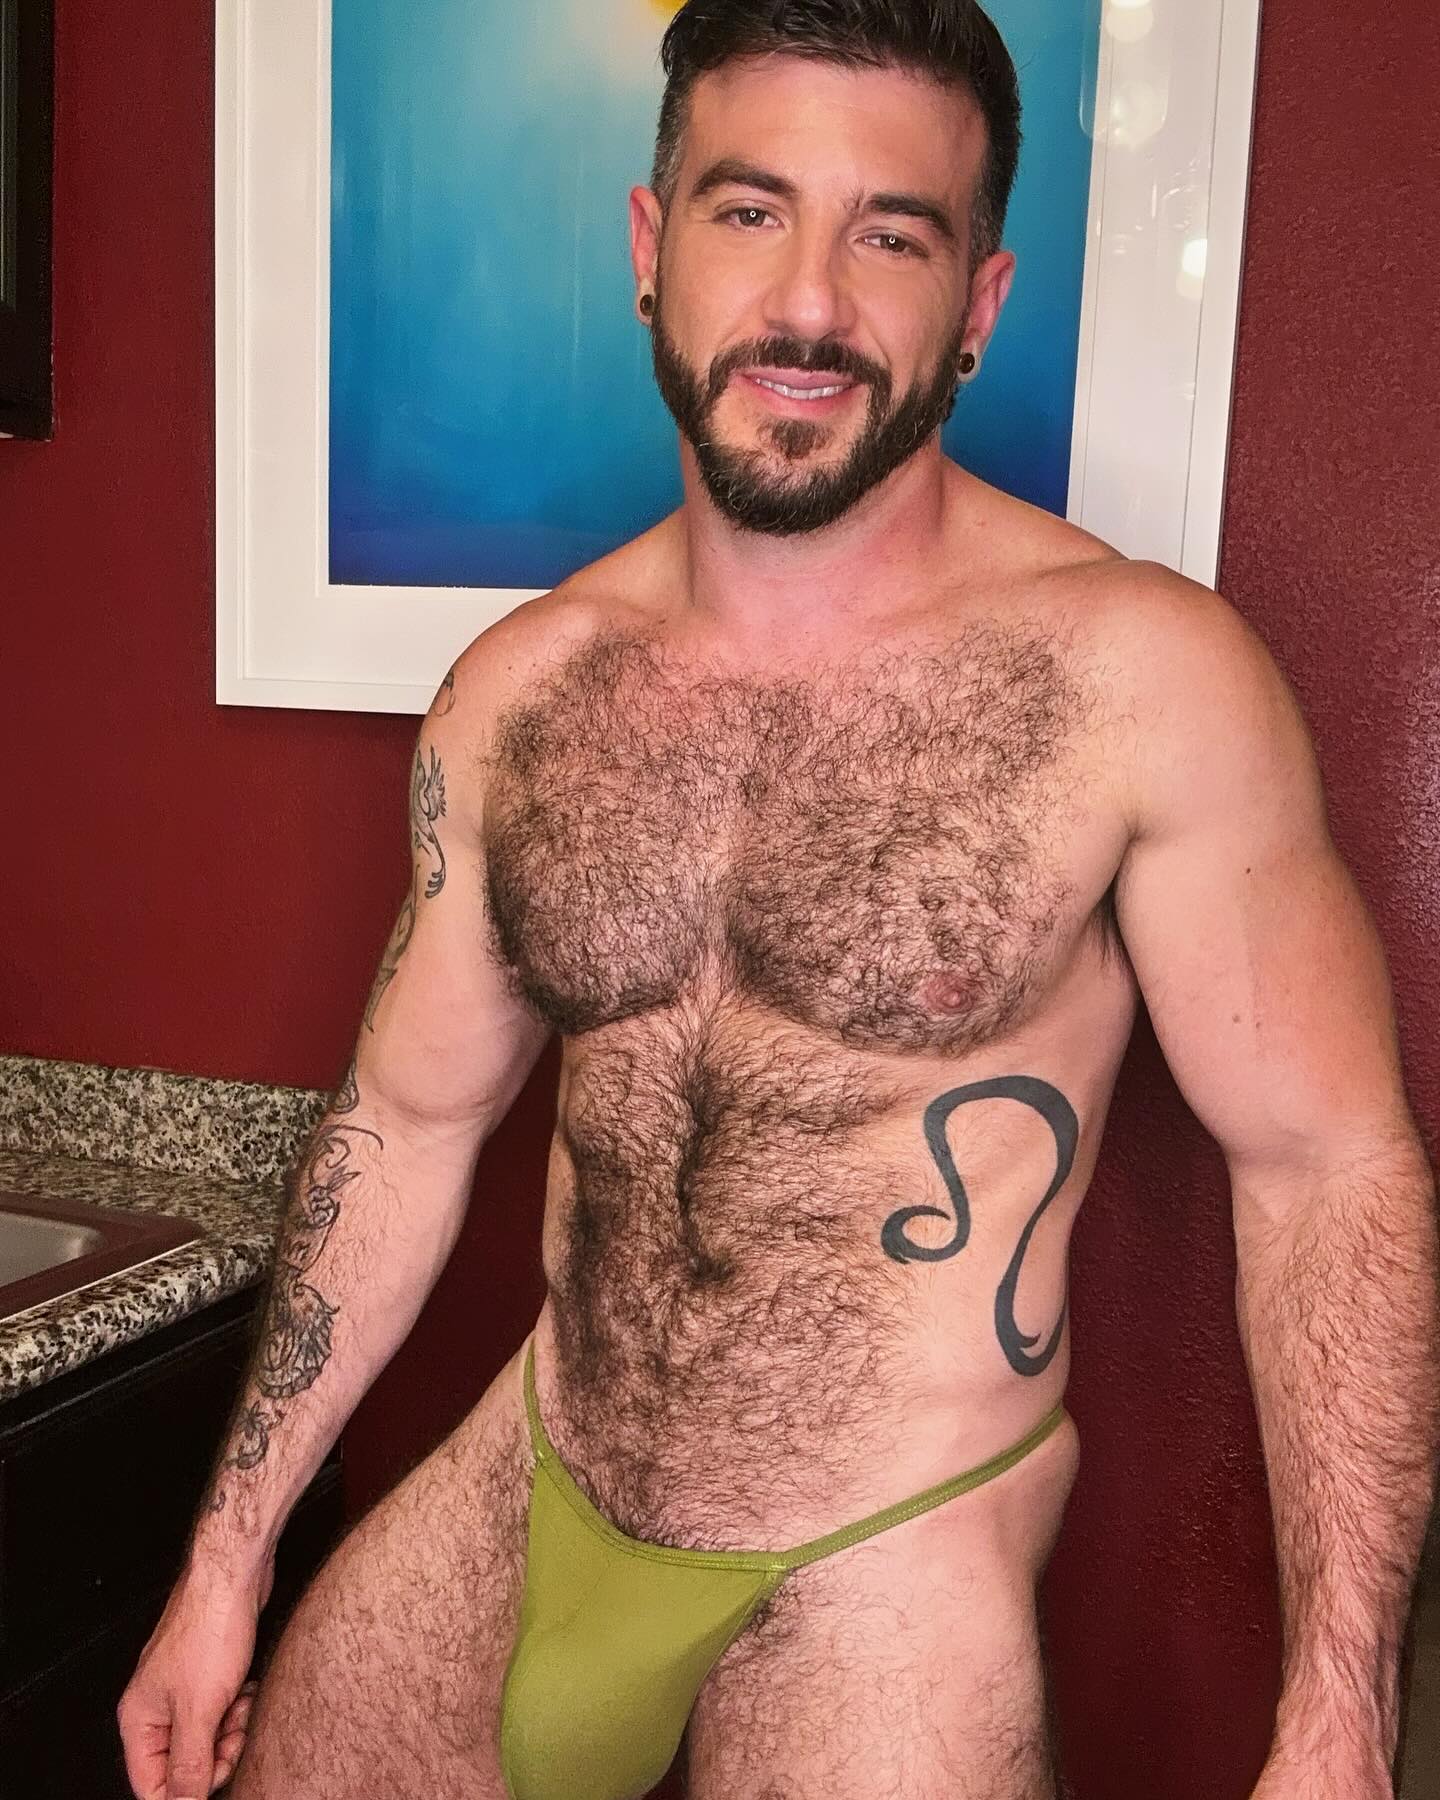 Green is my favorite color! I think it looks good this way 🤪

#greenthong #malethong #malelingerie #thong